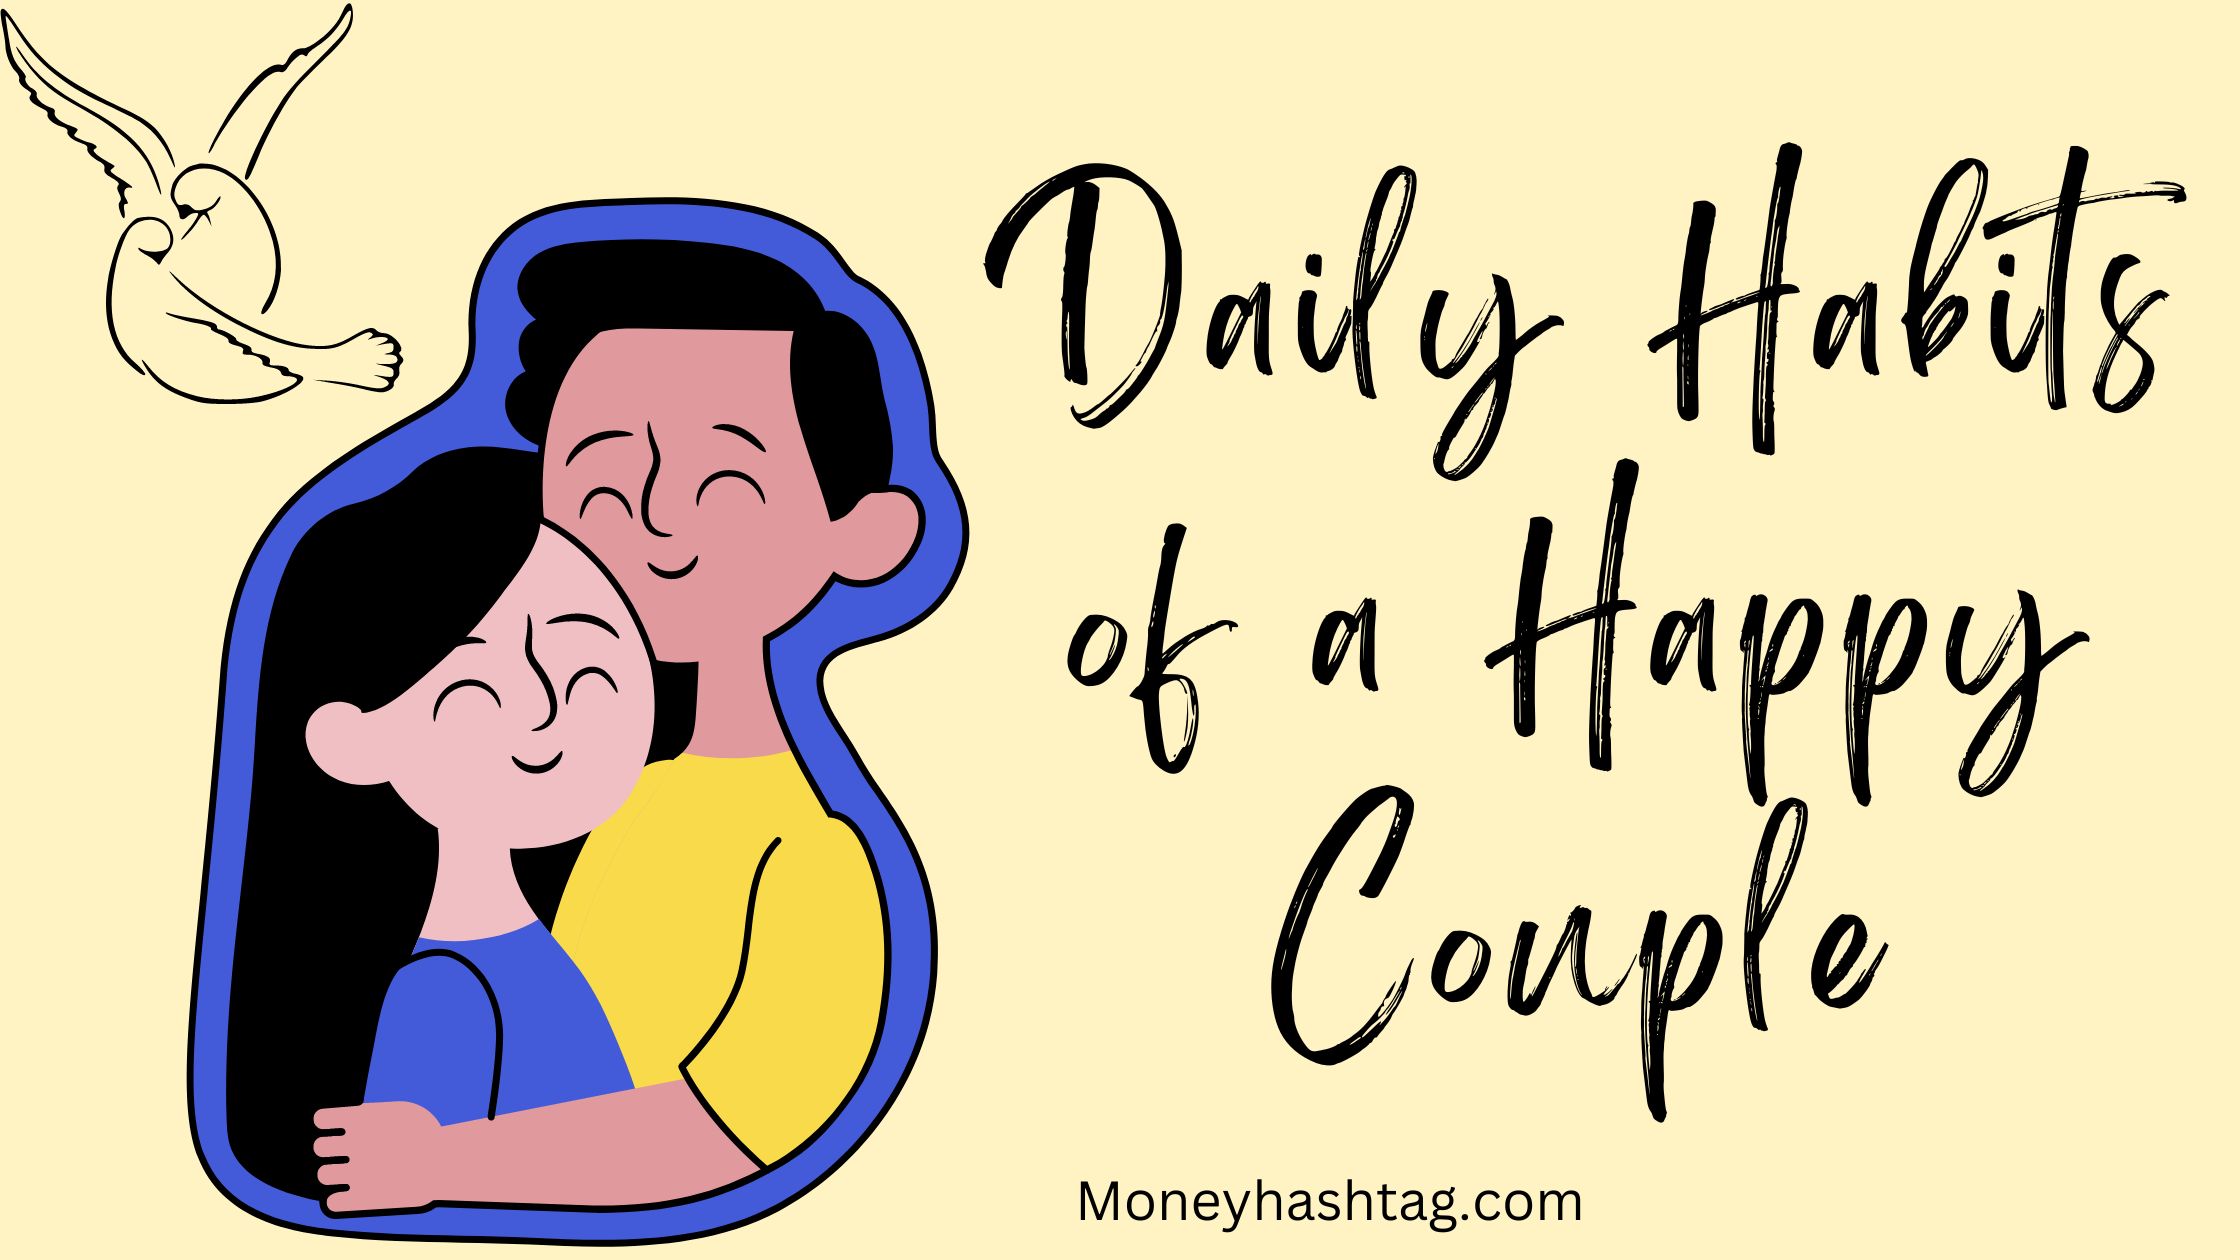 21 Daily Habits of a Happy Couple: How to be happier every day 6